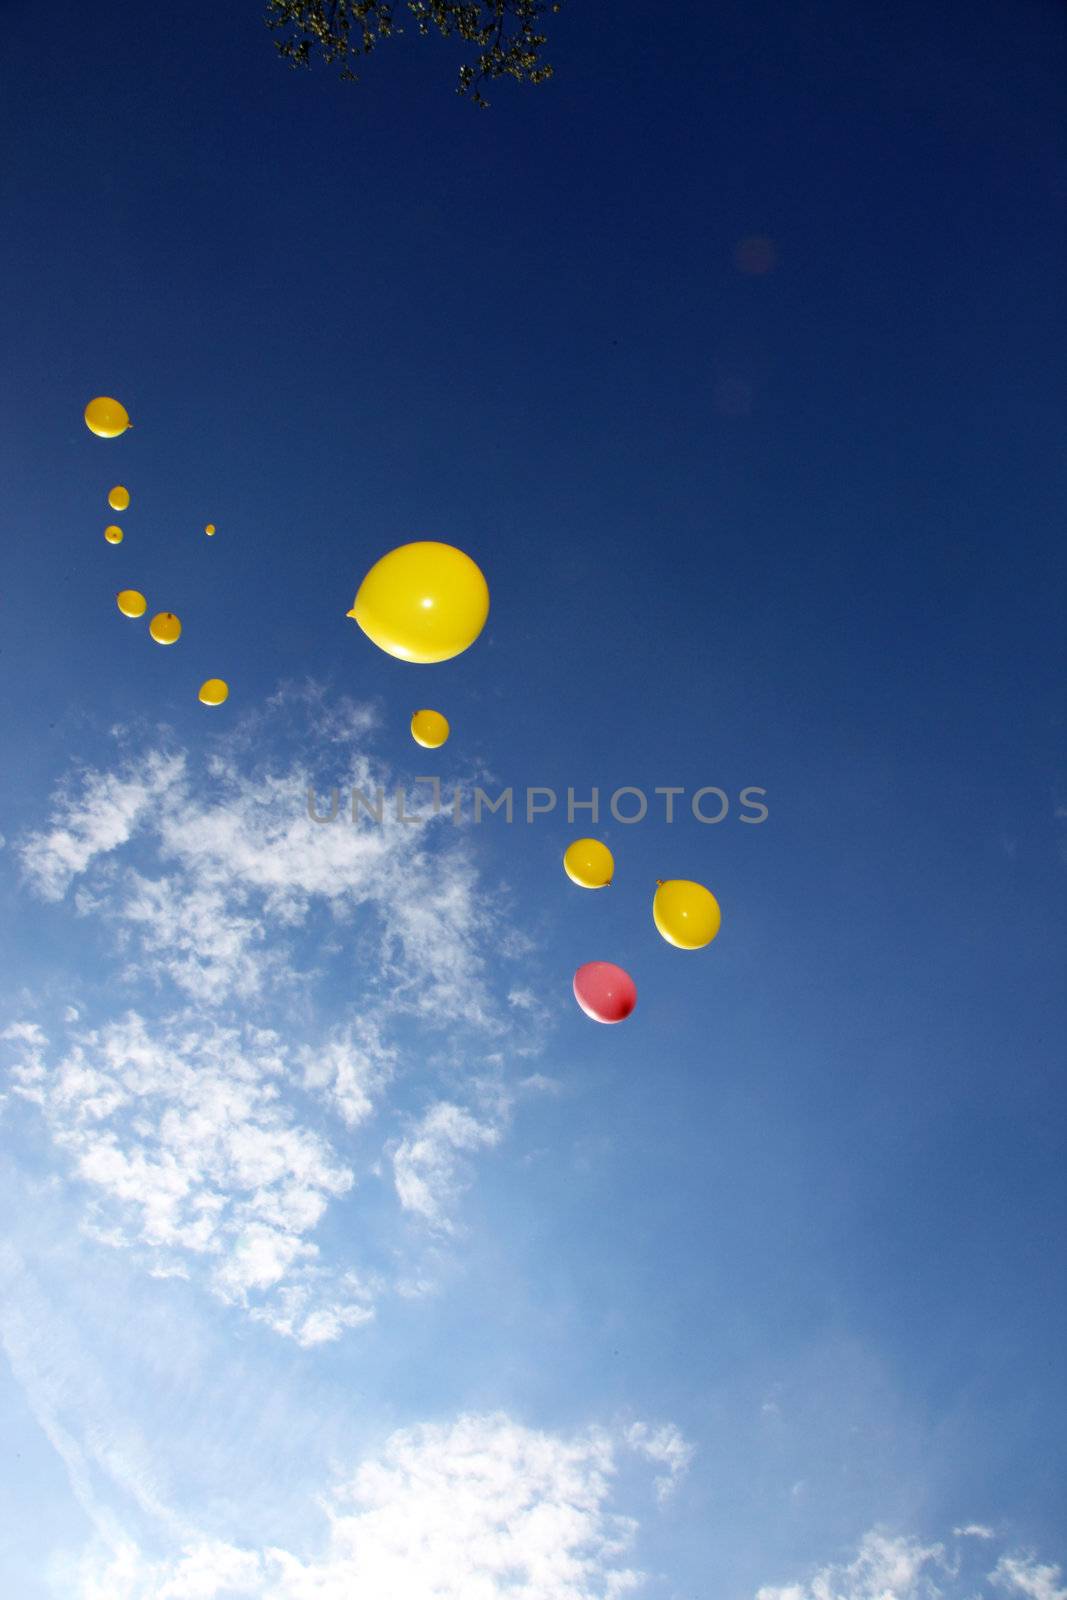 balloons against a blue sky by Farina6000